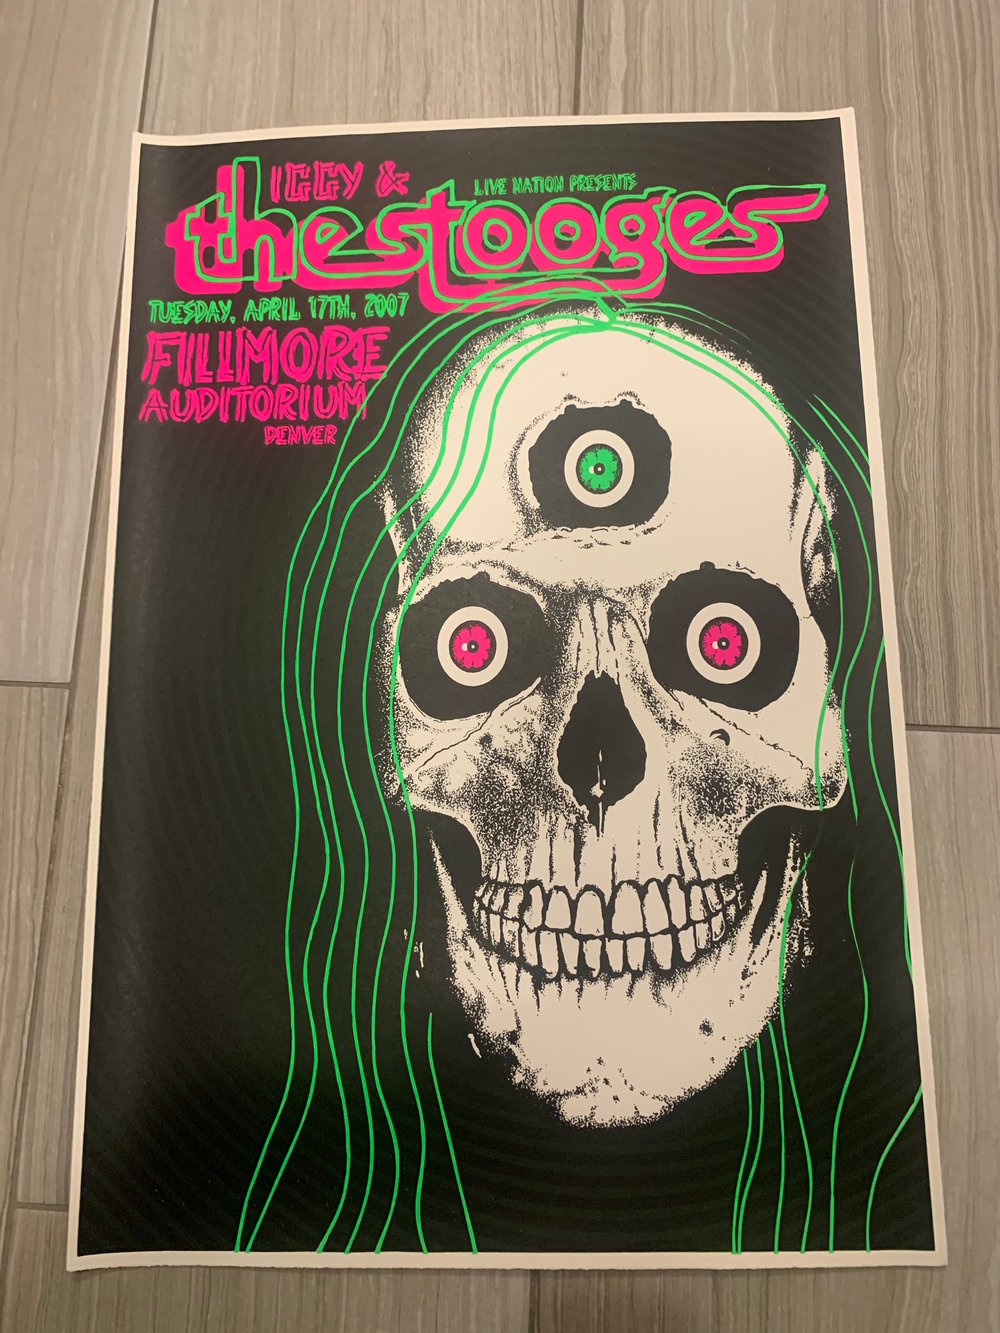 Iggy and the Stooges Silkscreen Concert Poster By Lindsey Kuhn